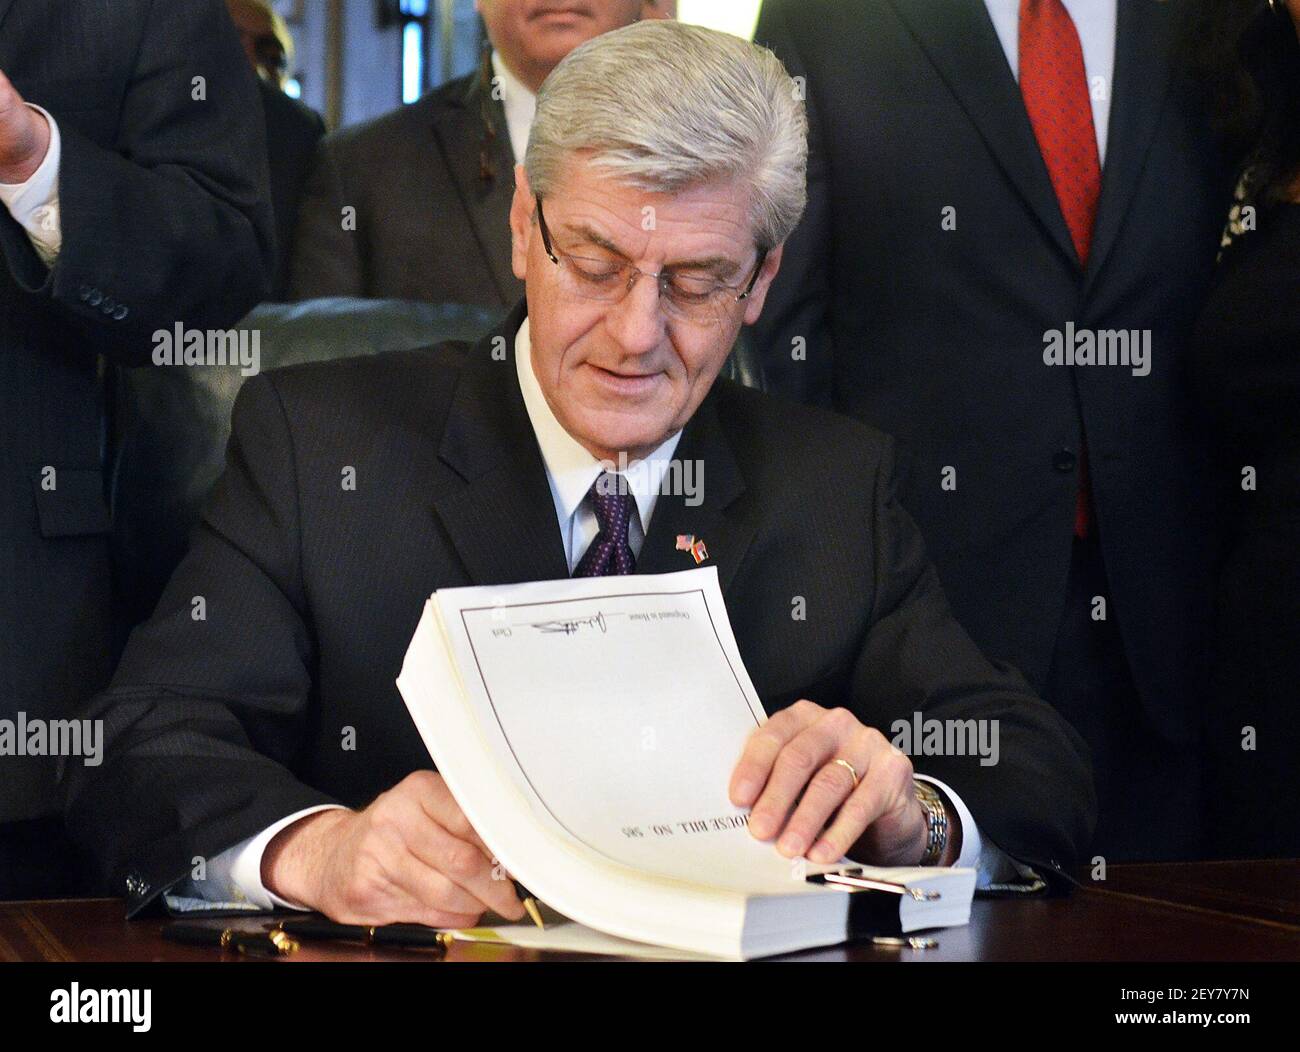 March 31, 2014; Jackson , MS, USA; Gov. Phil Bryant makes House Bill 585 official Monday during a signing ceremony at the state Capitol in Jackson. The bipartisan criminal justice reform package is designed to protect public safety, clarify sentencing practices and control corrections costs. Mandatory Credit: Greg Jenson/The Clarion-Ledger via USA TODAY NETWORK/Sipa USA Stock Photo